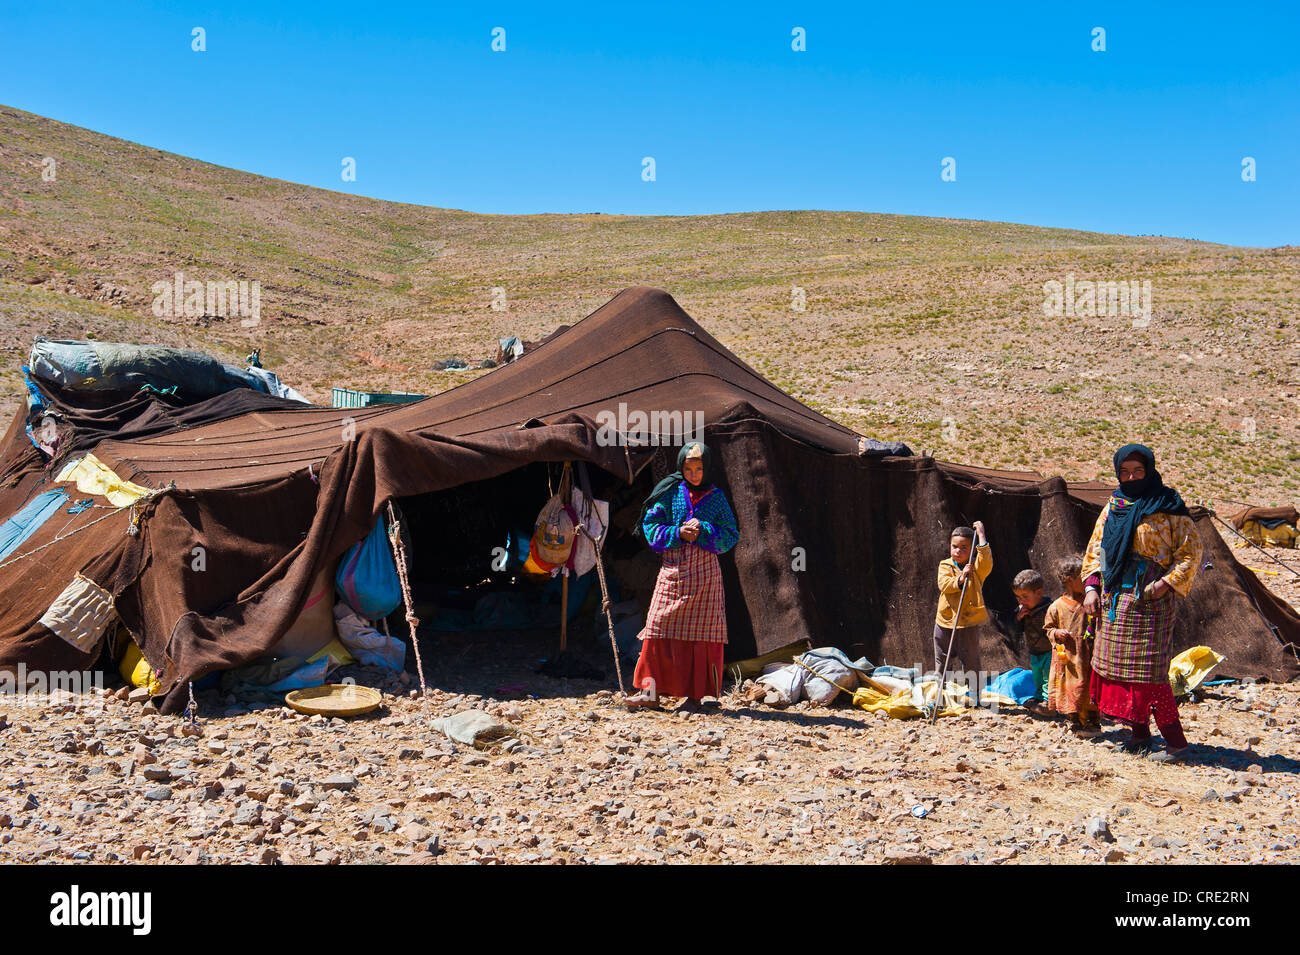 Women and children standing in front of their nomadic tent, Anti-Atlas, southern Morocco, Morocco, Africa Stock Photo